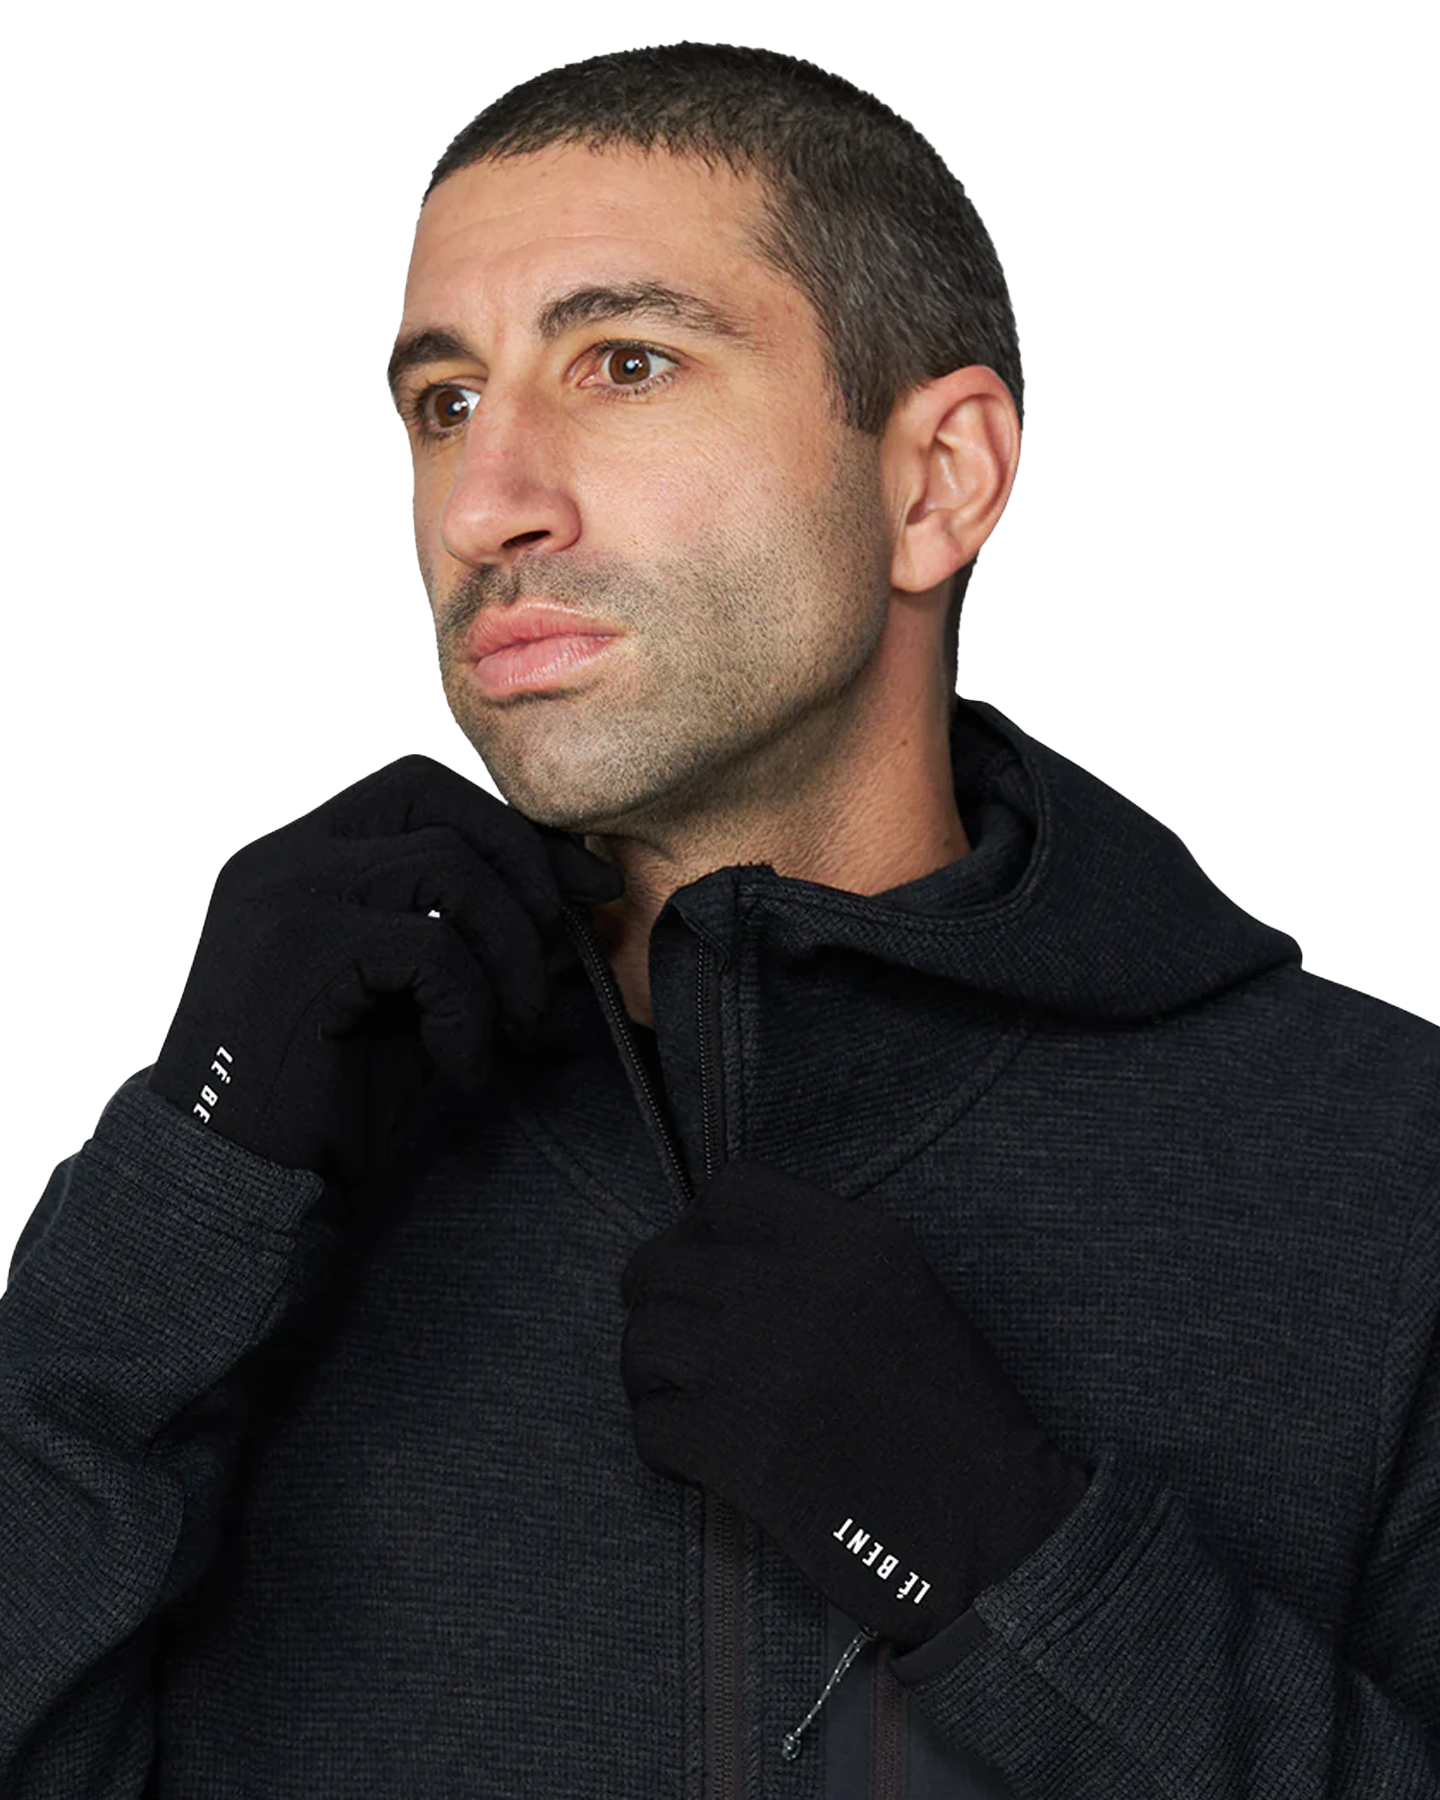 Le Bent Waffle Midweight Glove Liner - Black Snow Glove Liners - SnowSkiersWarehouse